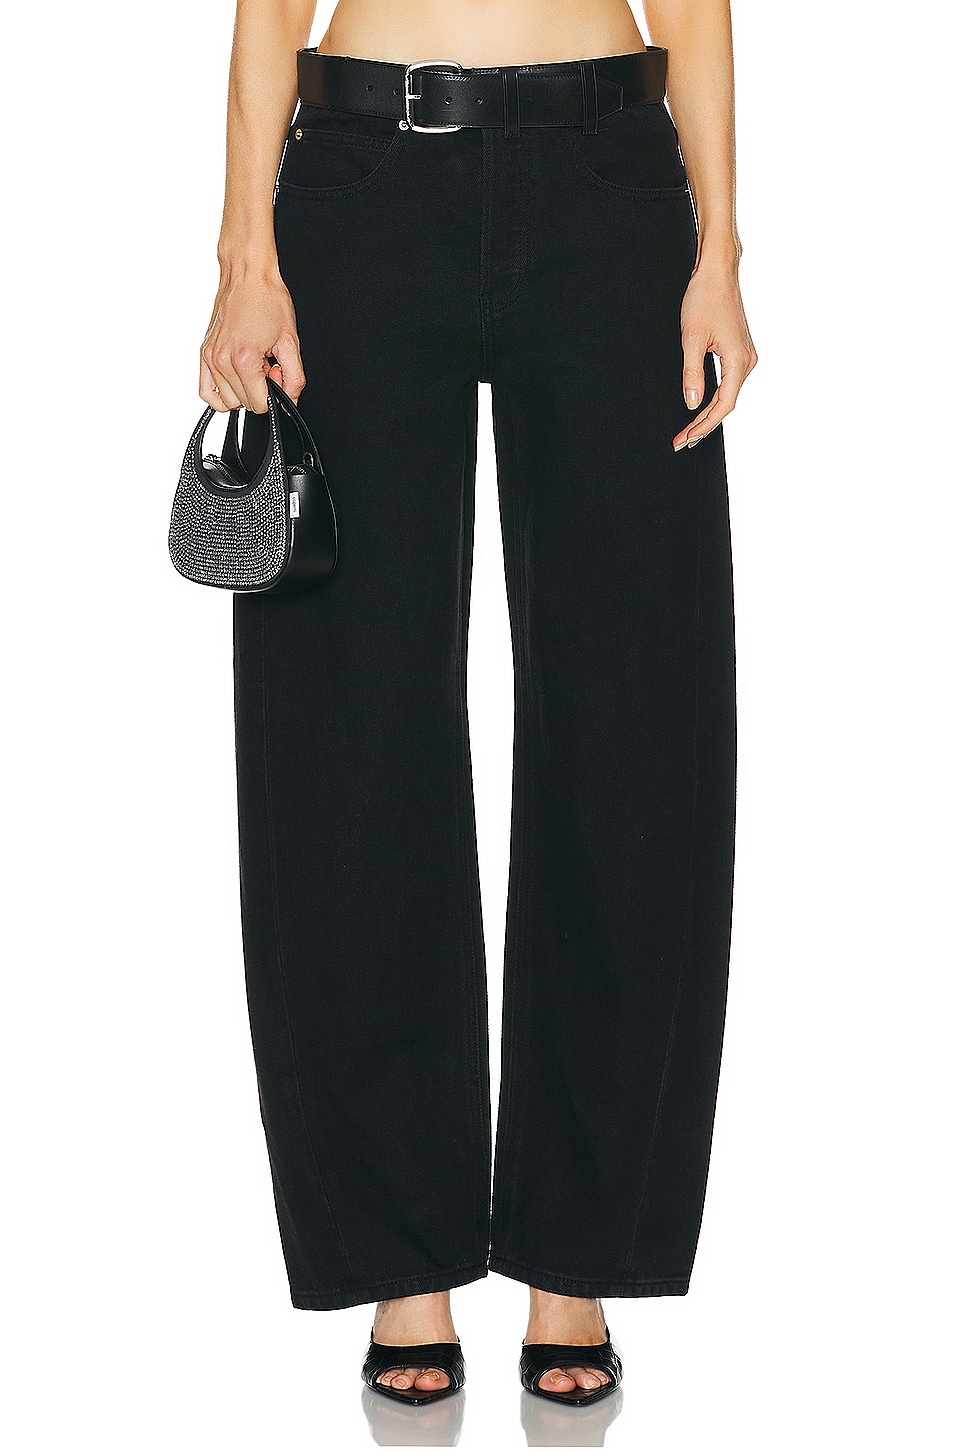 Image 1 of Alexander Wang Leather Belted Balloon Jean in Washed Black